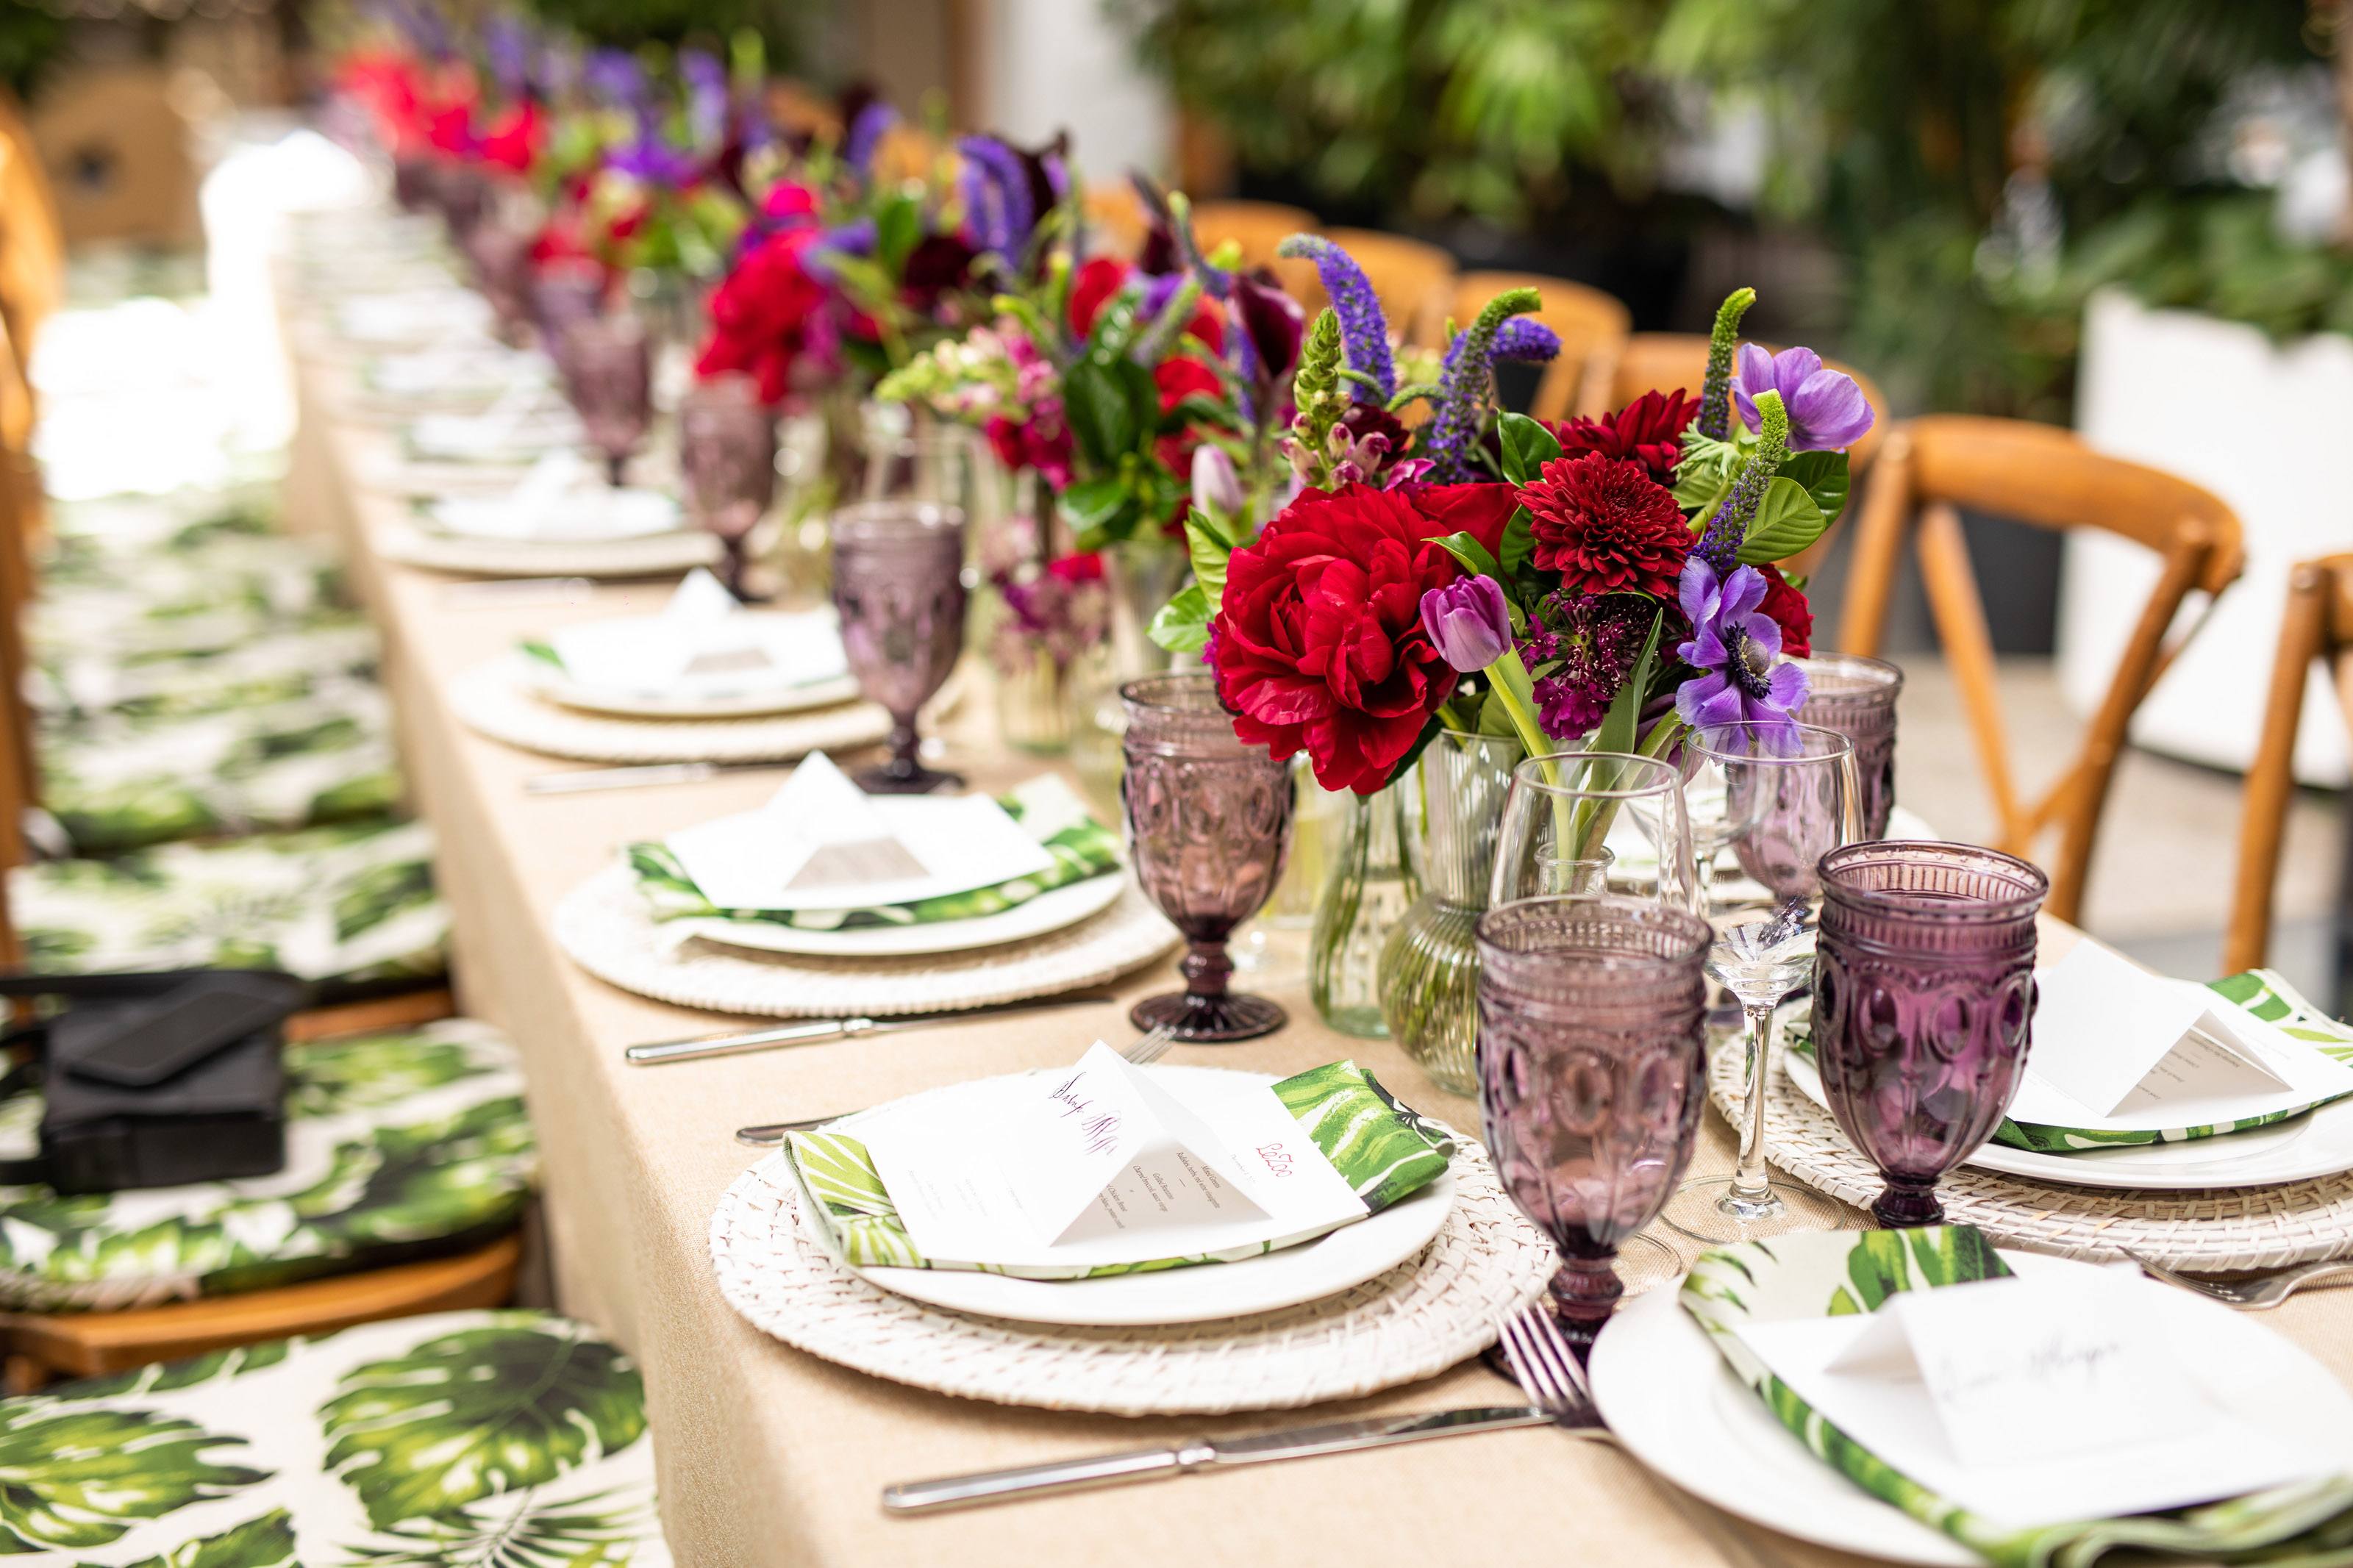 A decorated table setting